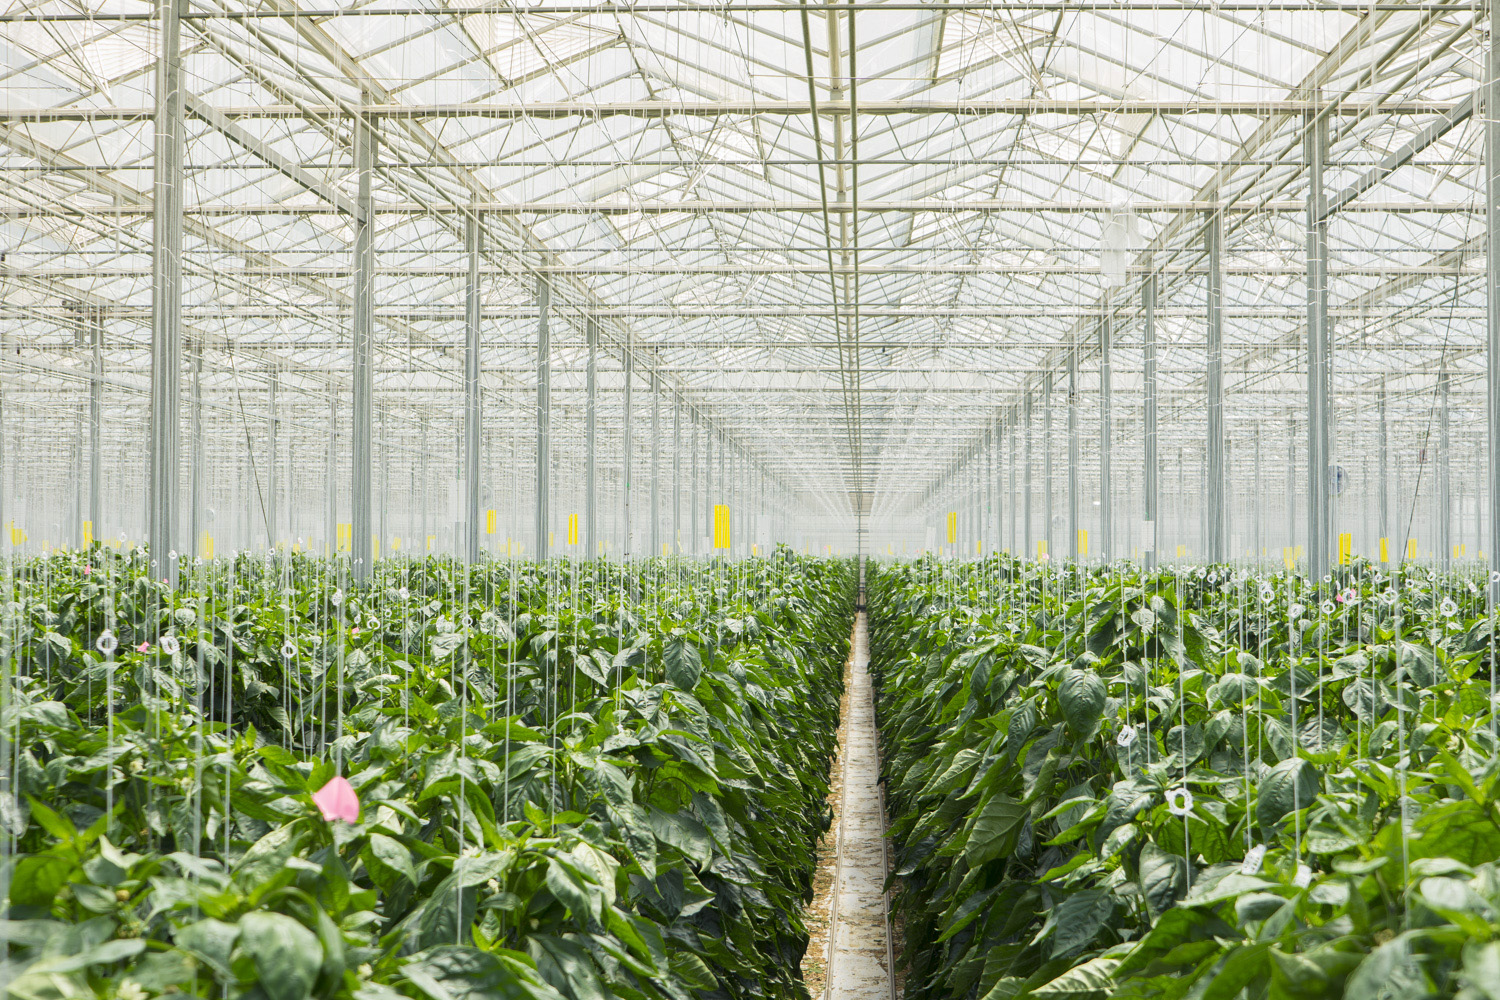 View down a planting row in a greenhouse